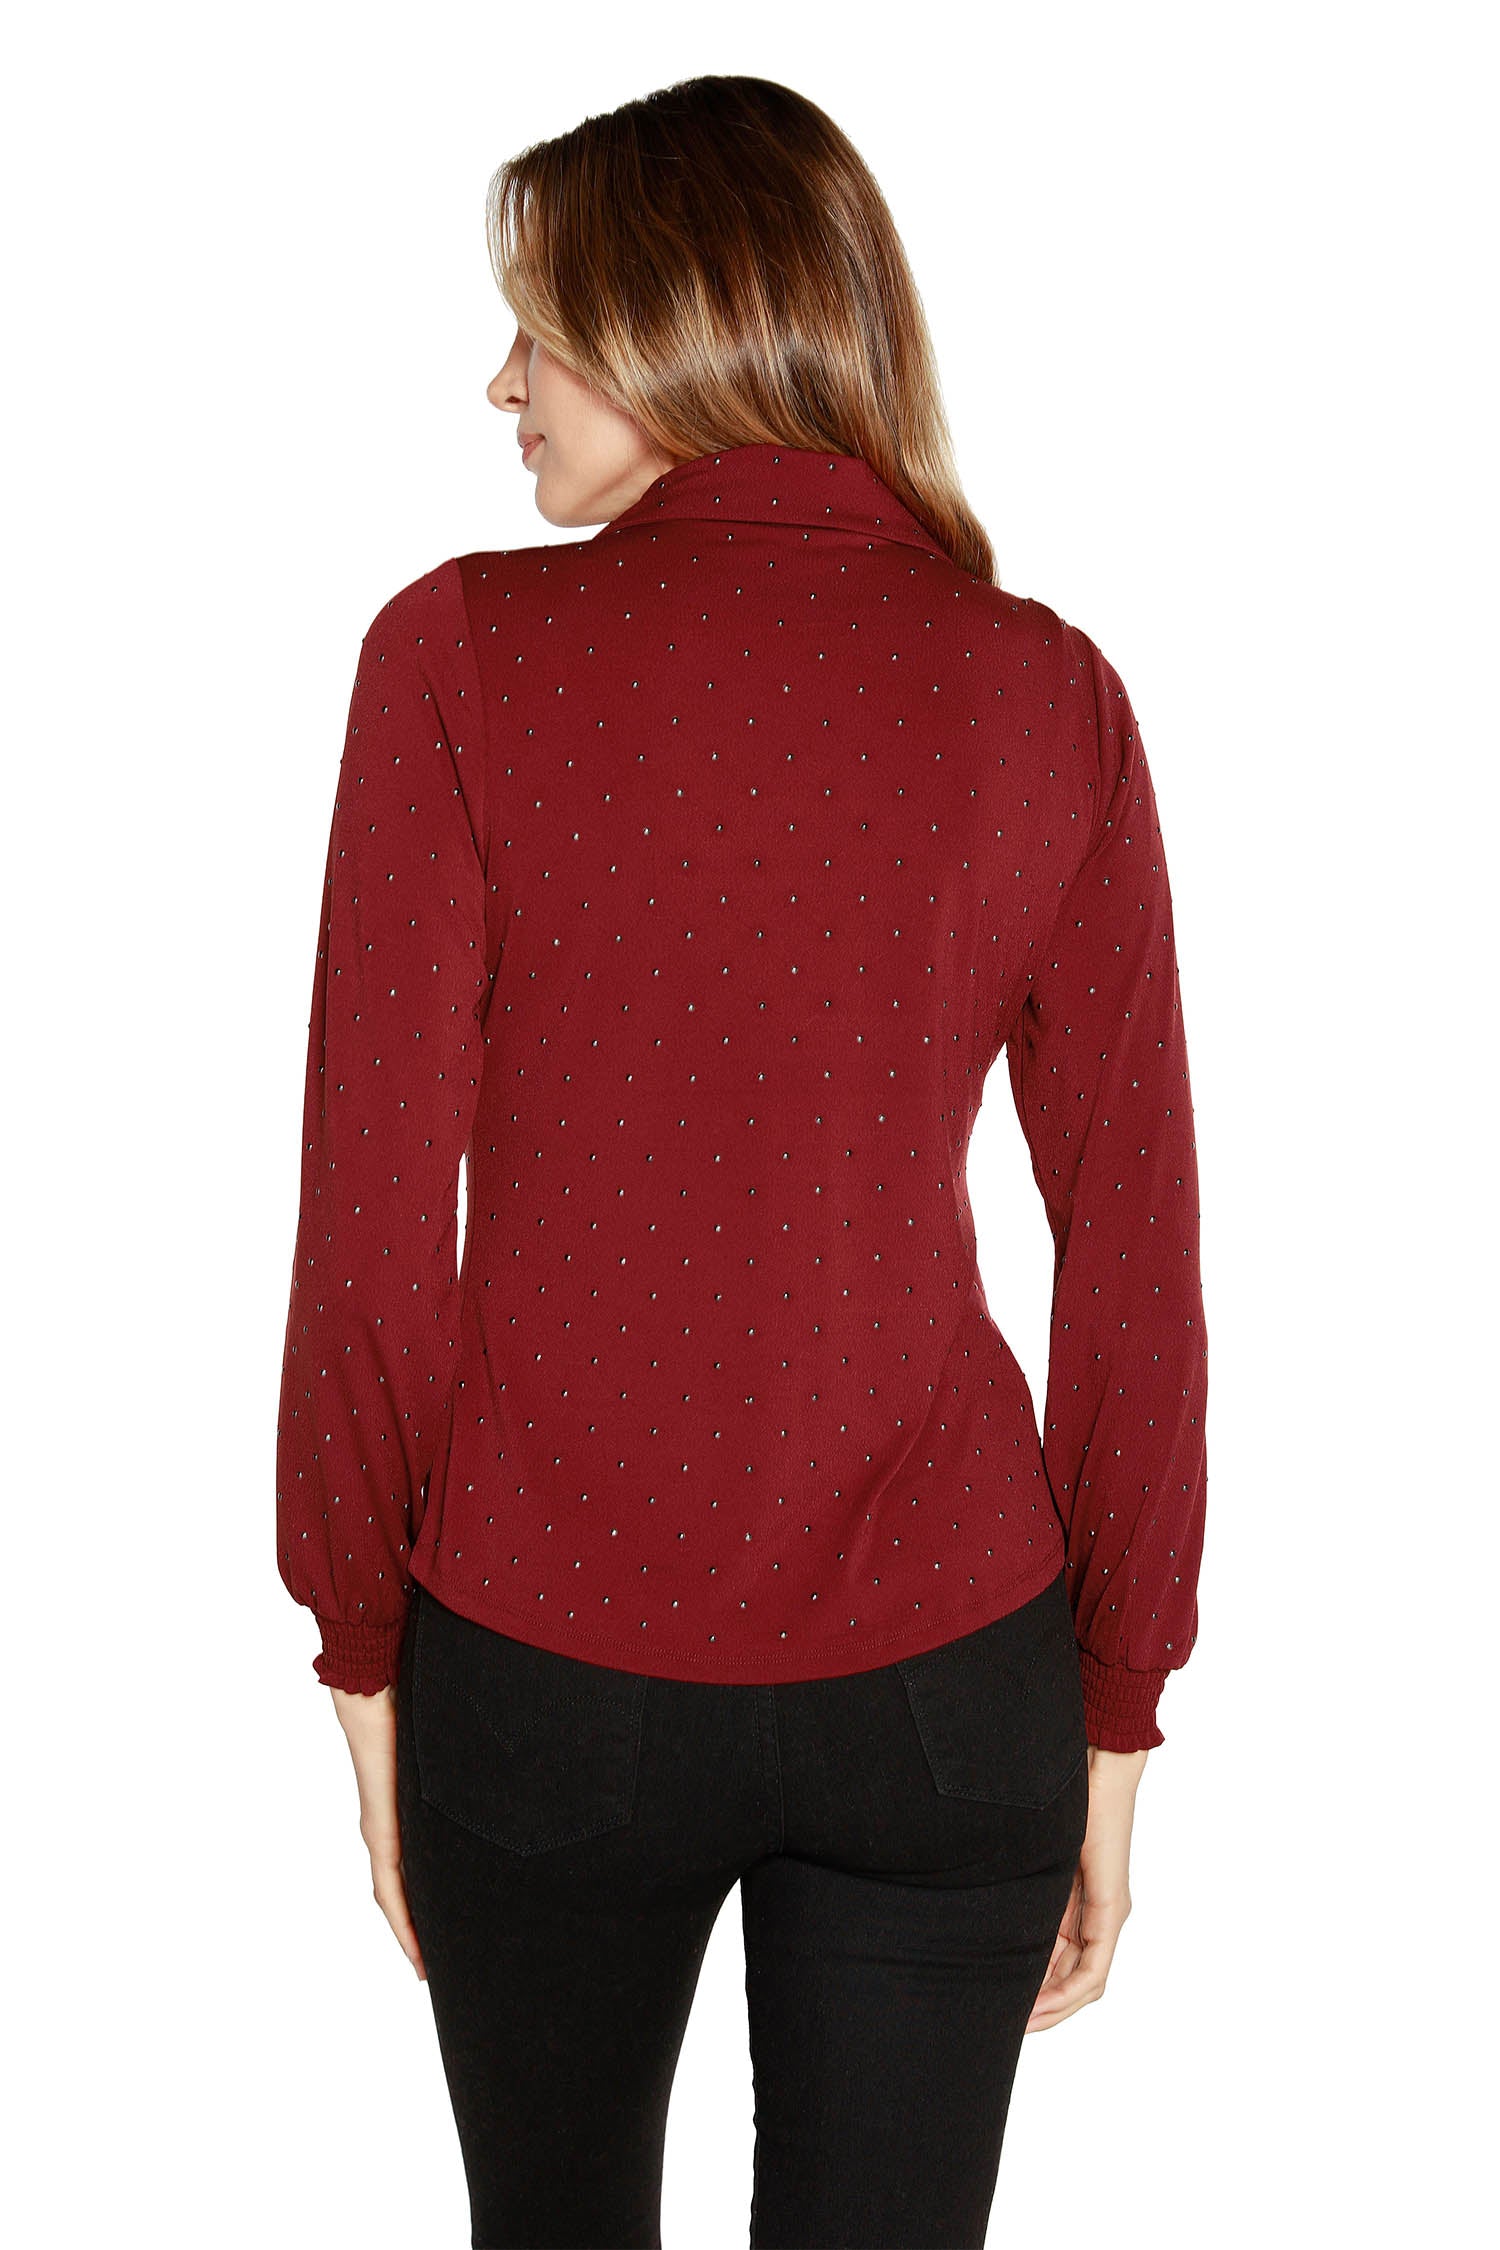 Women's Button Front Blouse with Long Blouson Sleeves with Metallic Studs